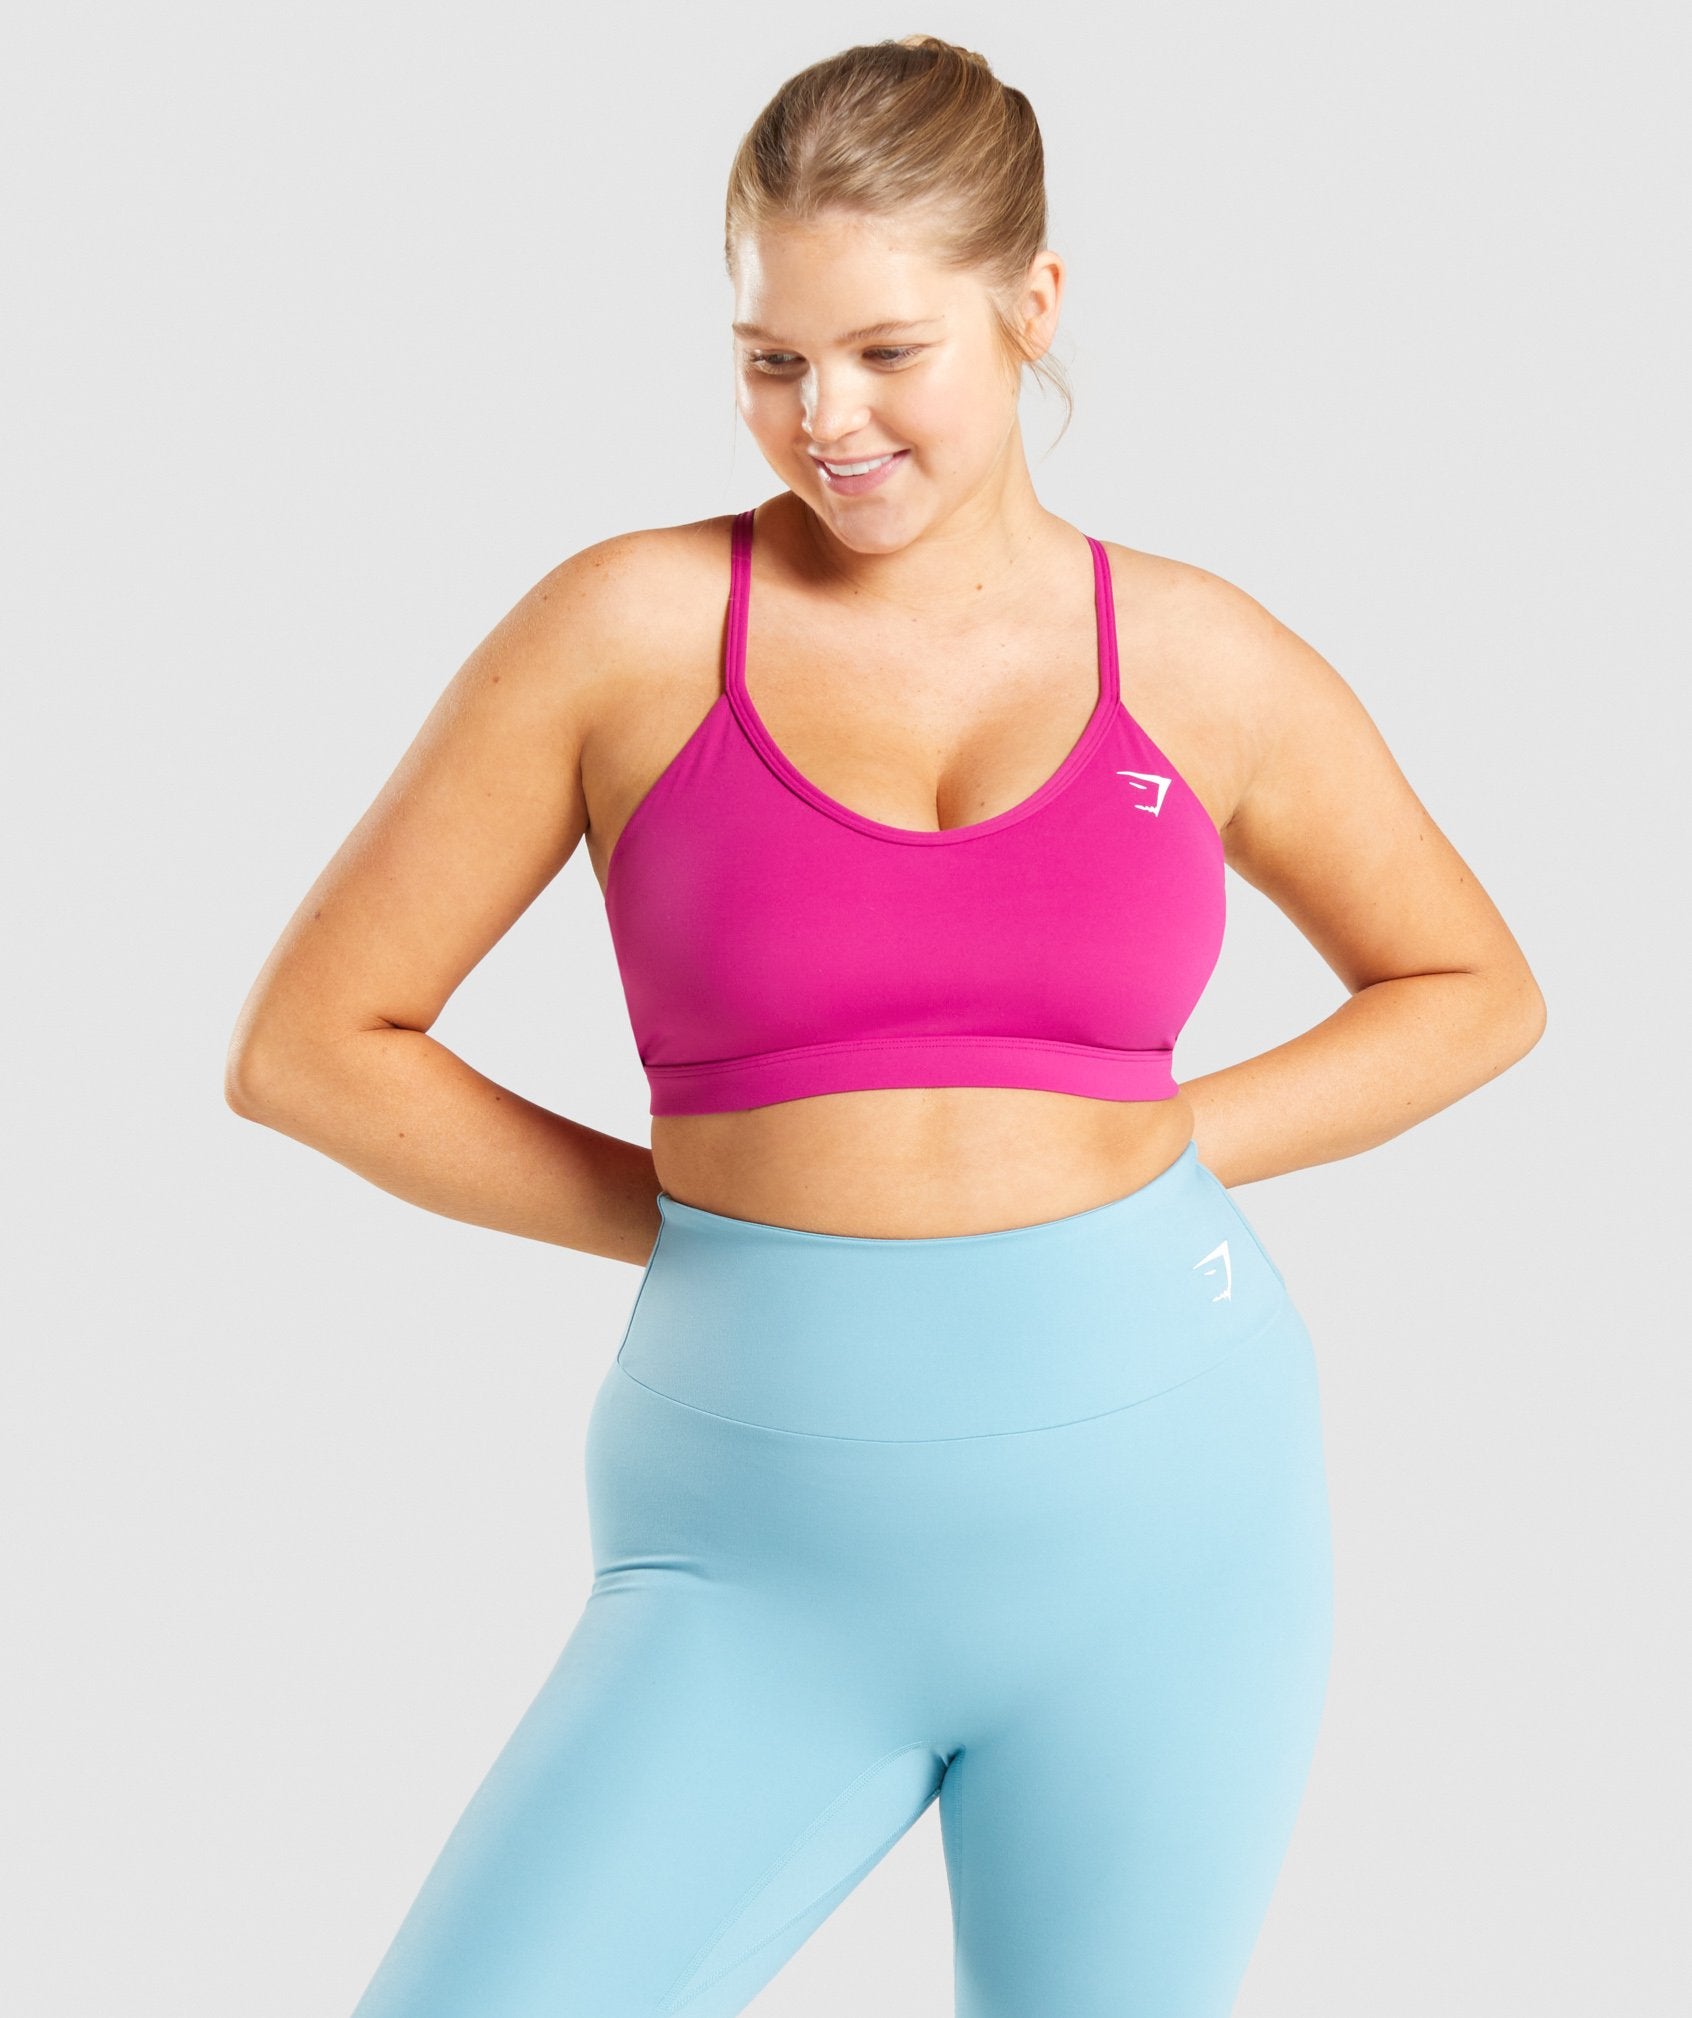 Gymshark V Neck Training Sports Bra - Pink Size M - $29 (51% Off Retail) -  From delell